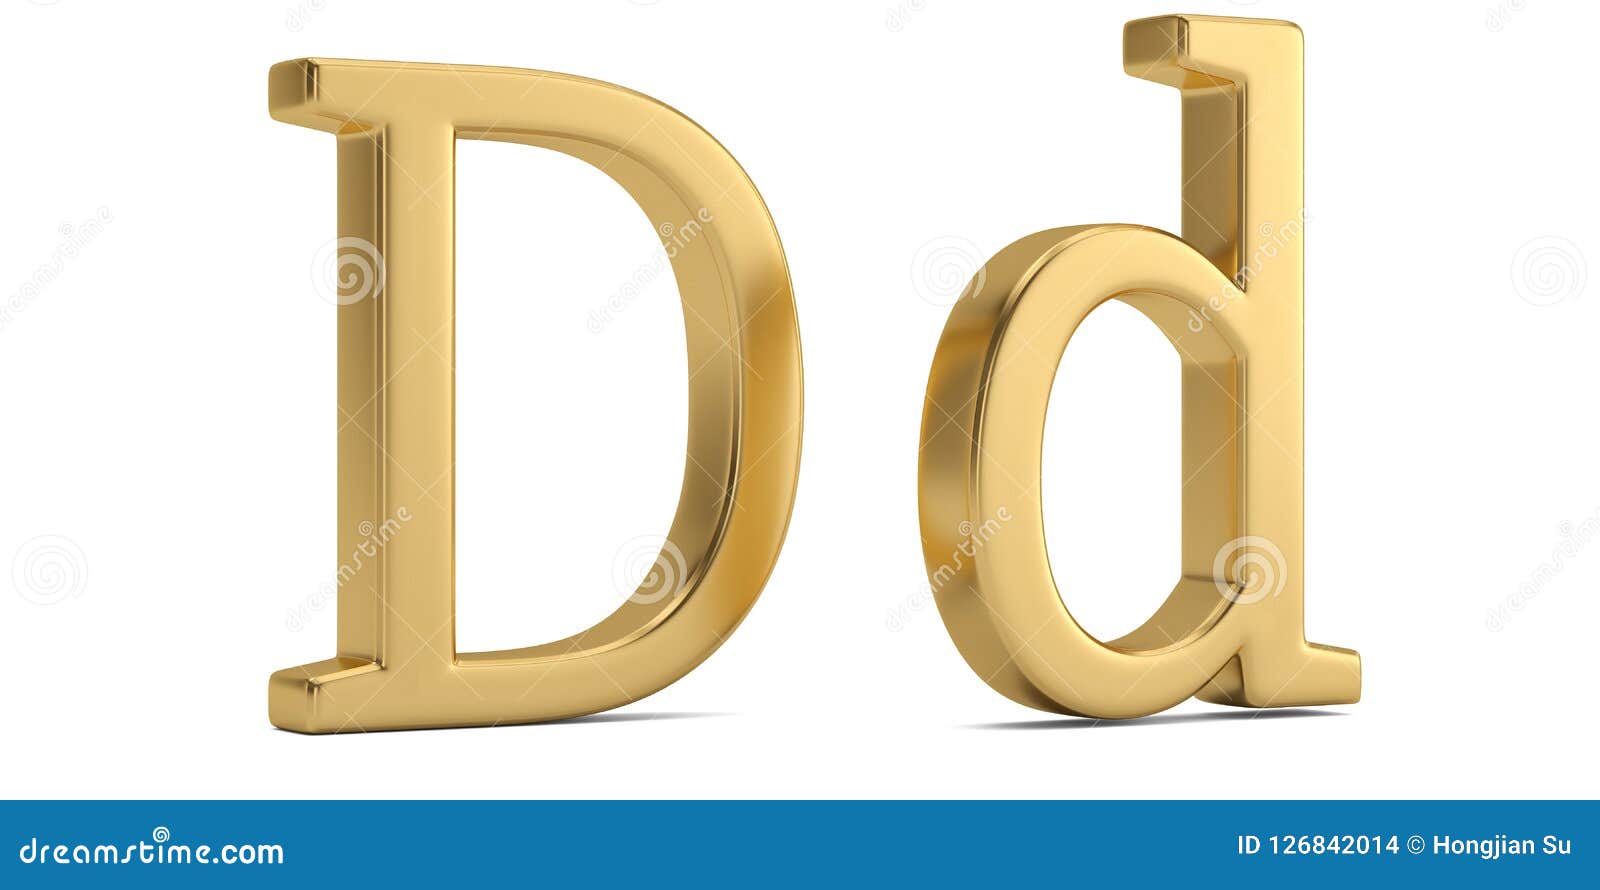 Gold Metal D Alphabet Isolated on White Background 3D Illustration ...